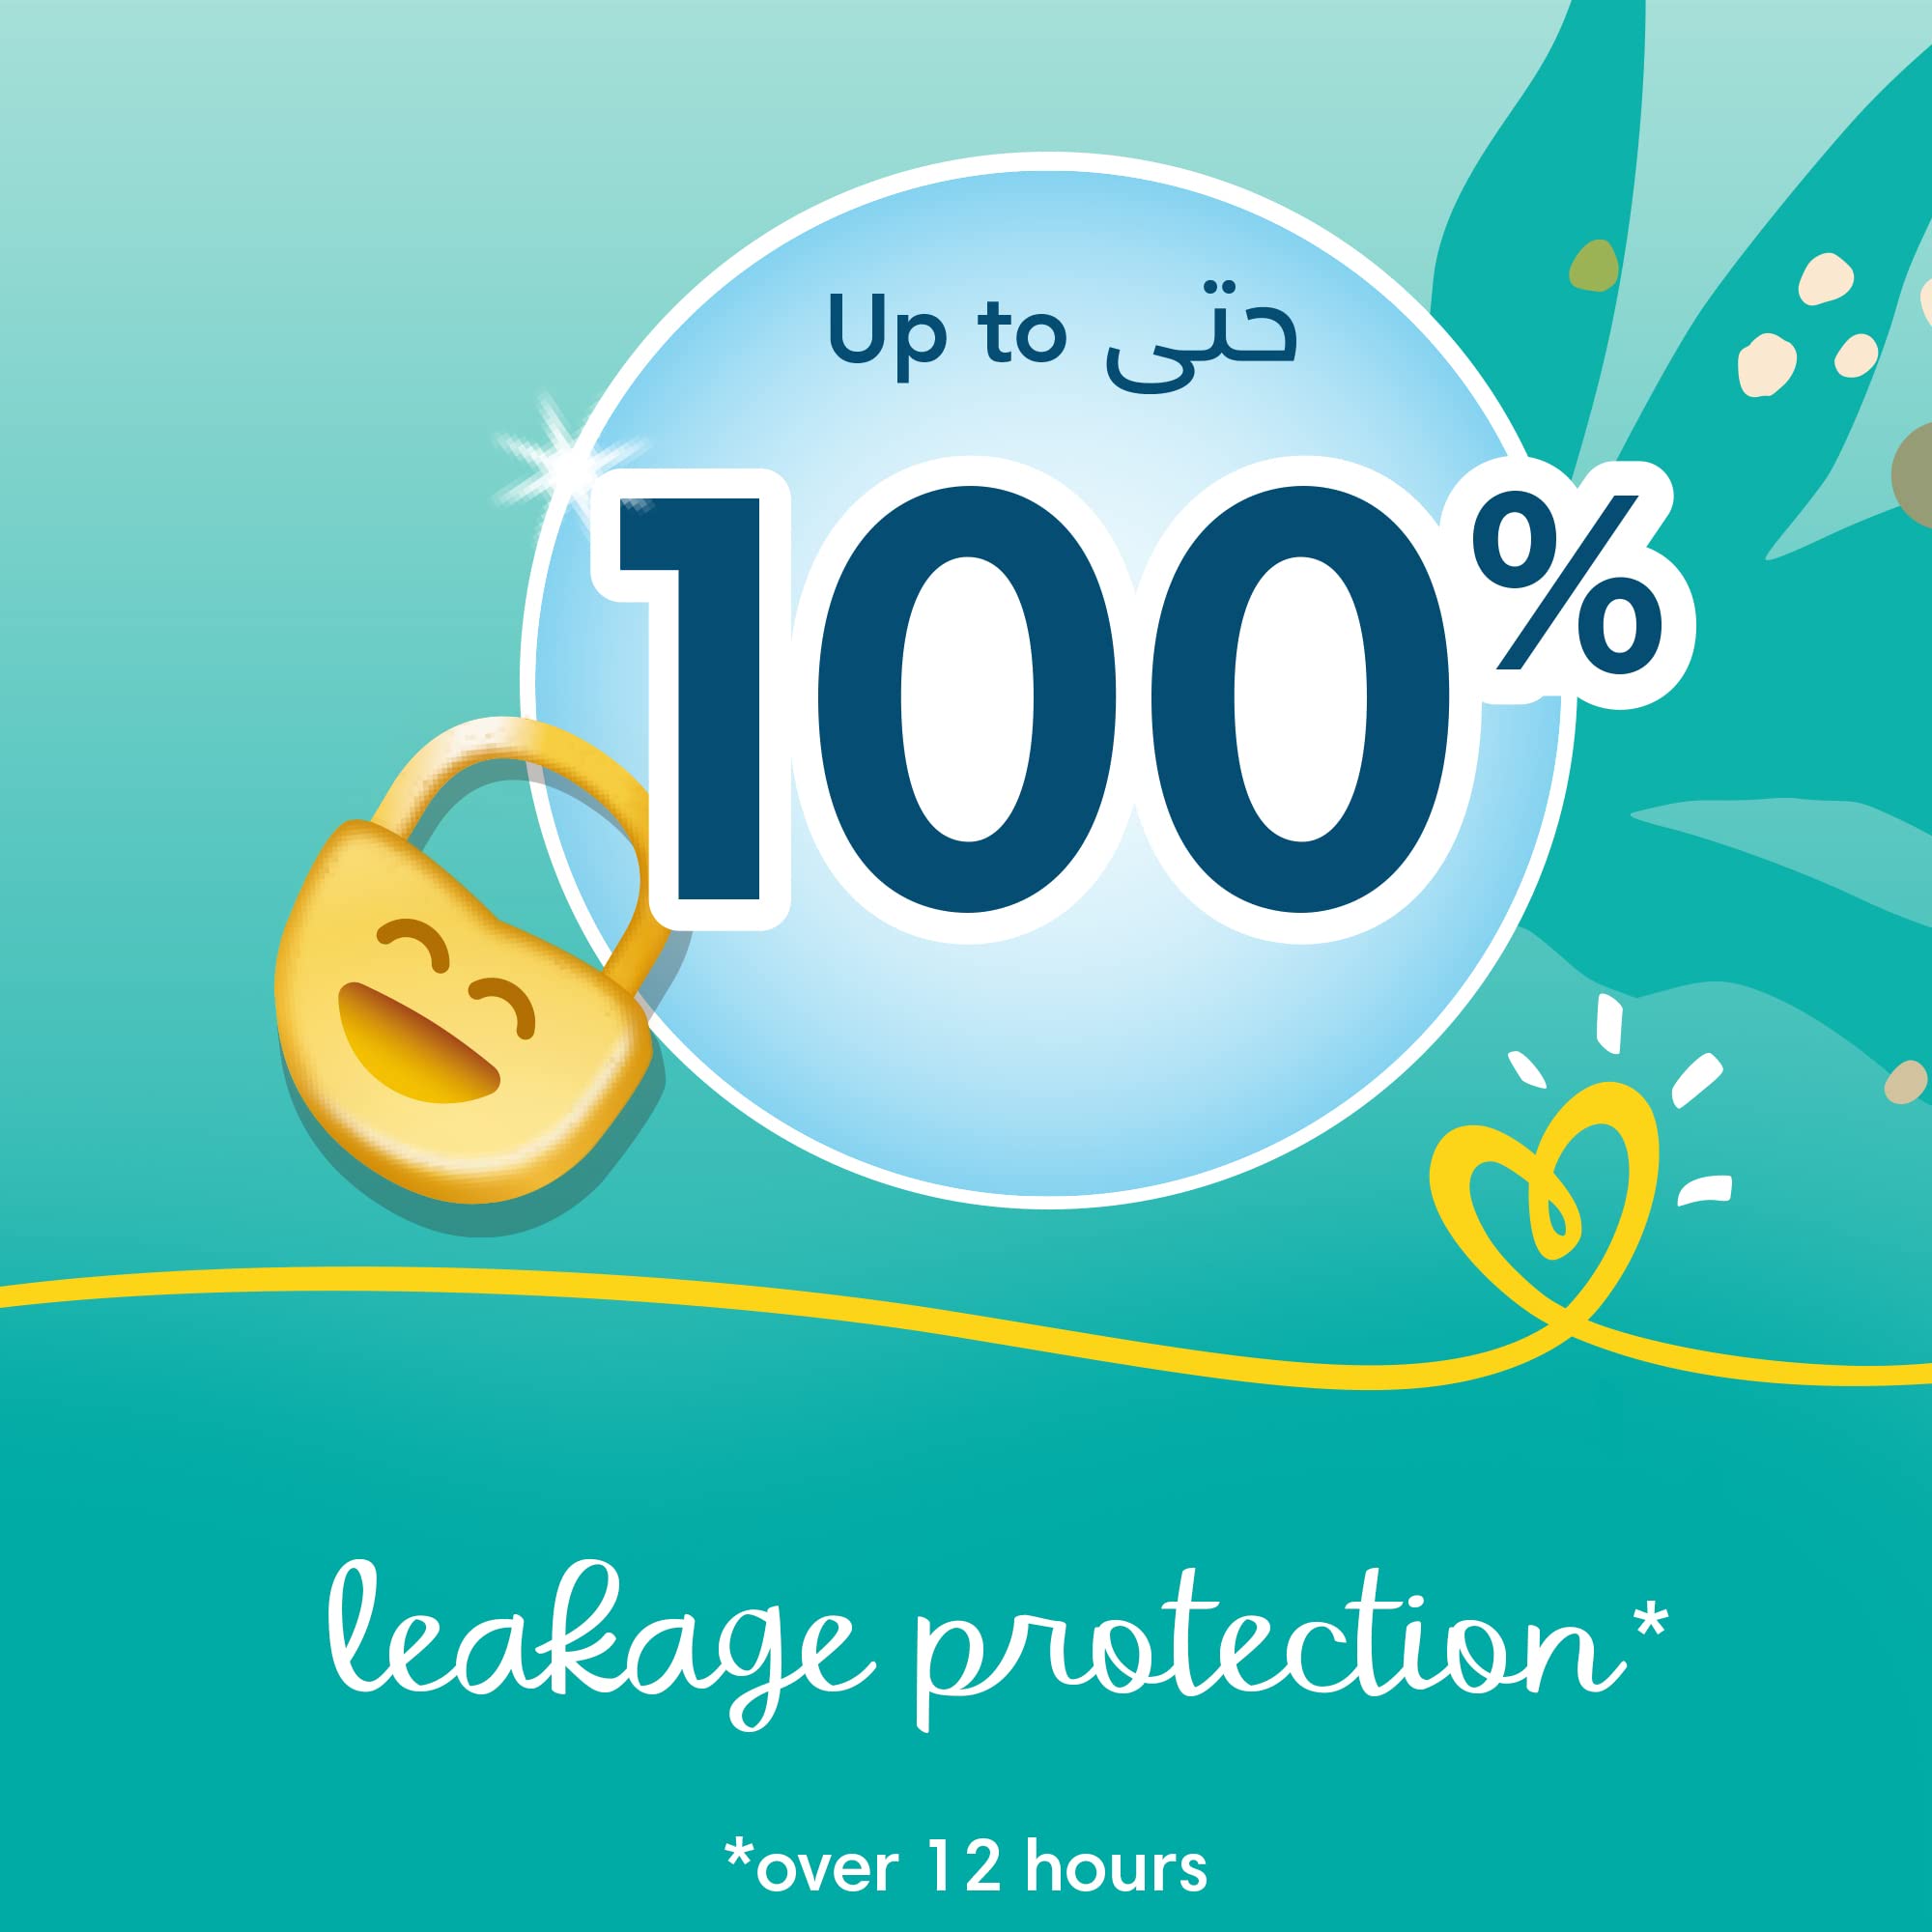 Pampers Baby-Dry Diapers with Aloe Vera Lotion and Leakage Protection, Size 4, 9-14 kg, 160 Diapers ( 16 Diapers × 10 ) حفاضات بامبرز اكتيف بيبي دراي، حجم 4، ميجا باك - 7-14 كغم، 160 قطعة